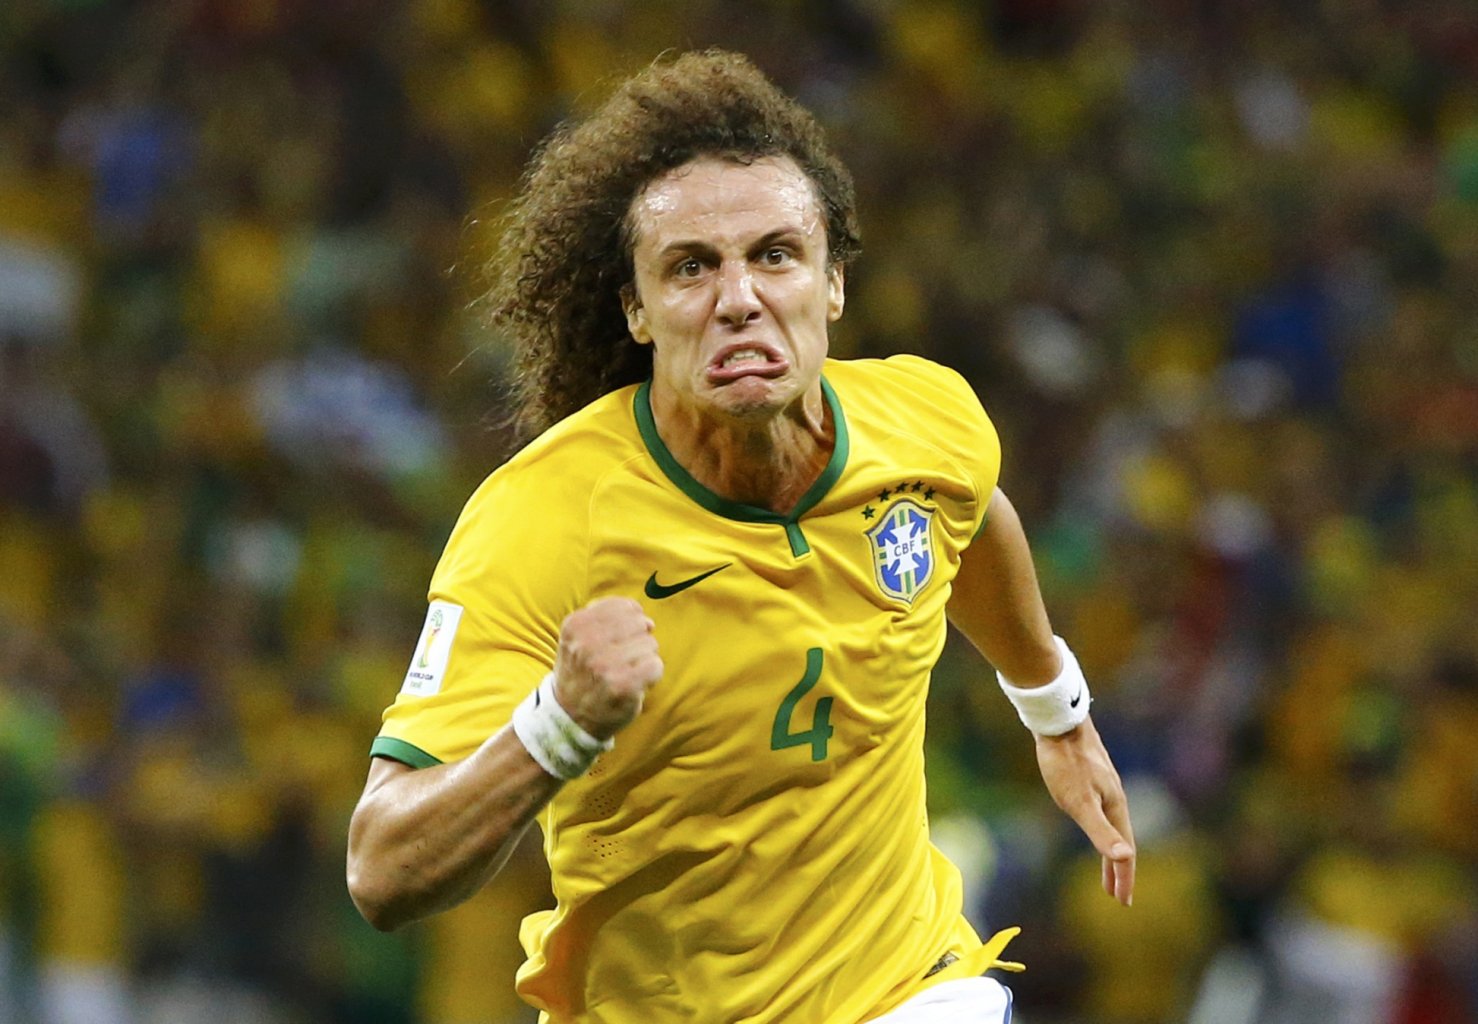 David Luiz goal celebration and crazy face, after scoring in Brazil 2-1 Colombia, in the FIFA World Cup 2014